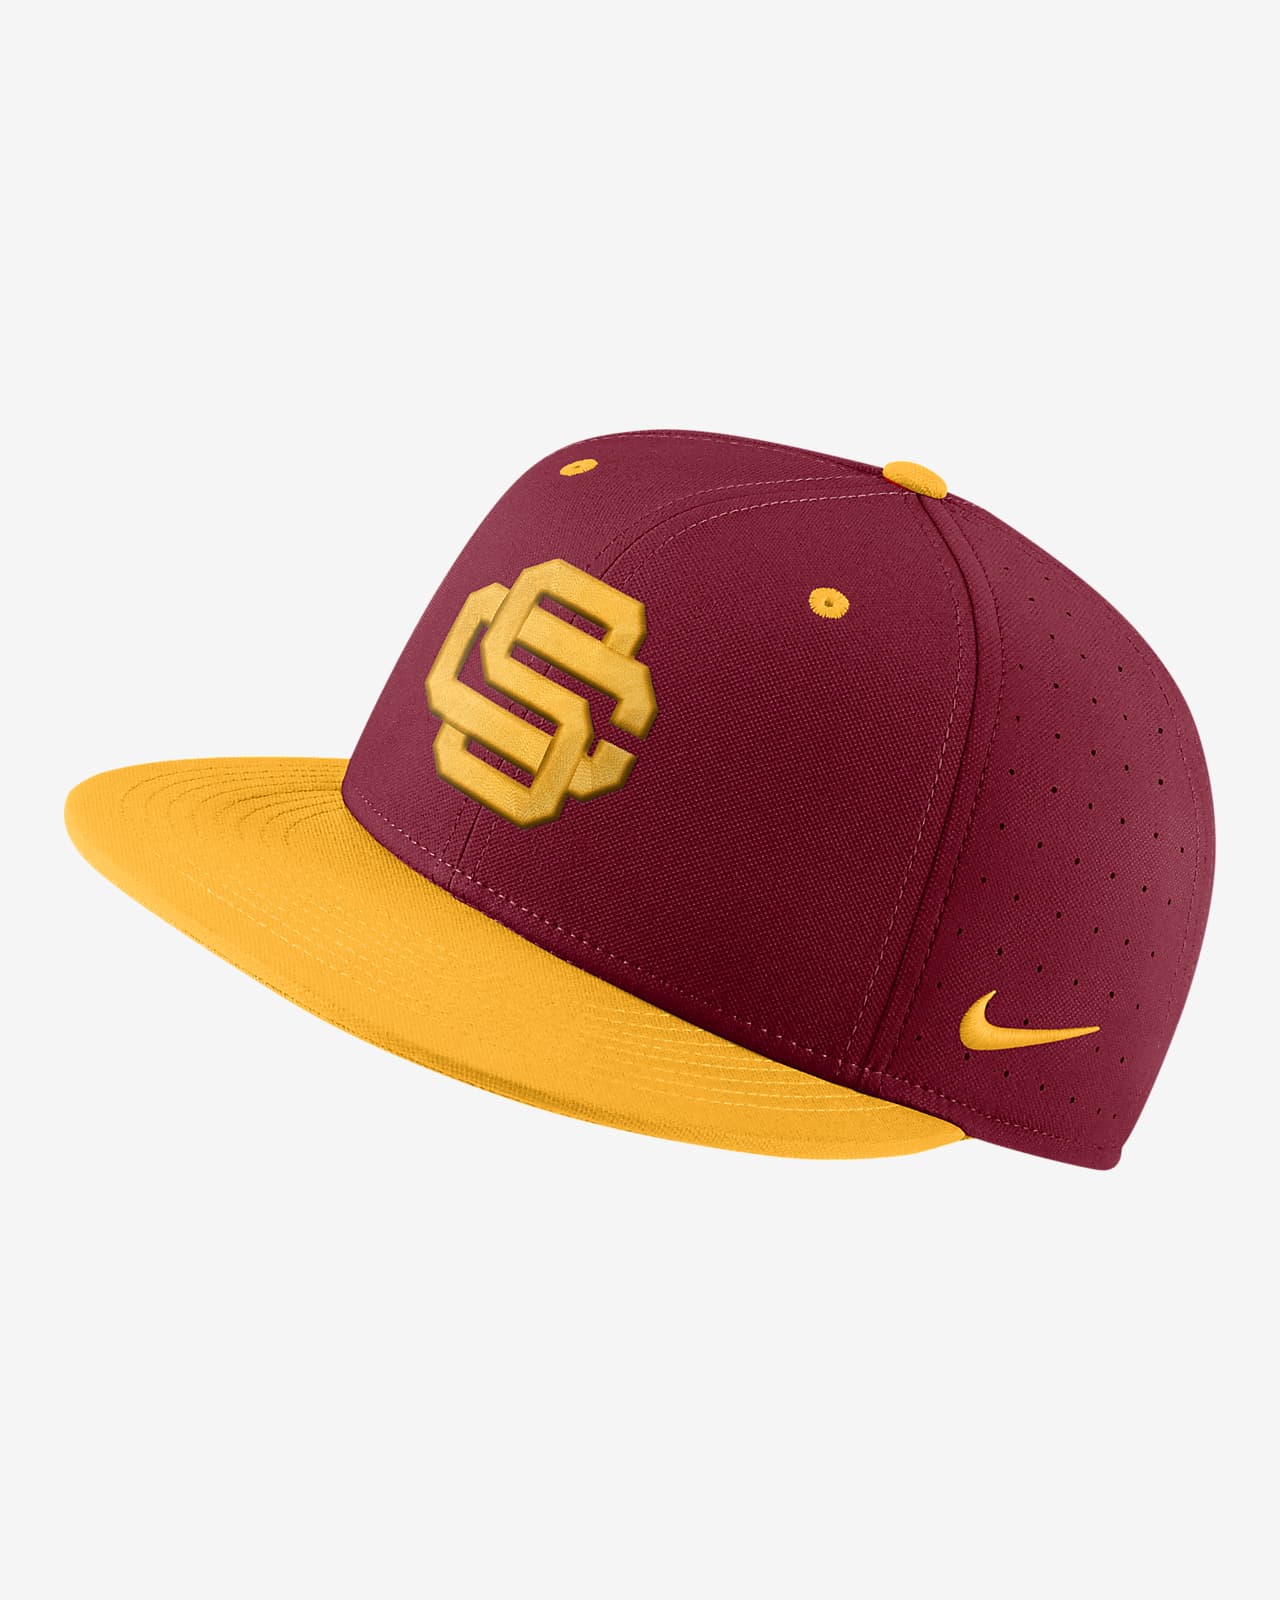 USC Nike College Fitted Baseball Hat